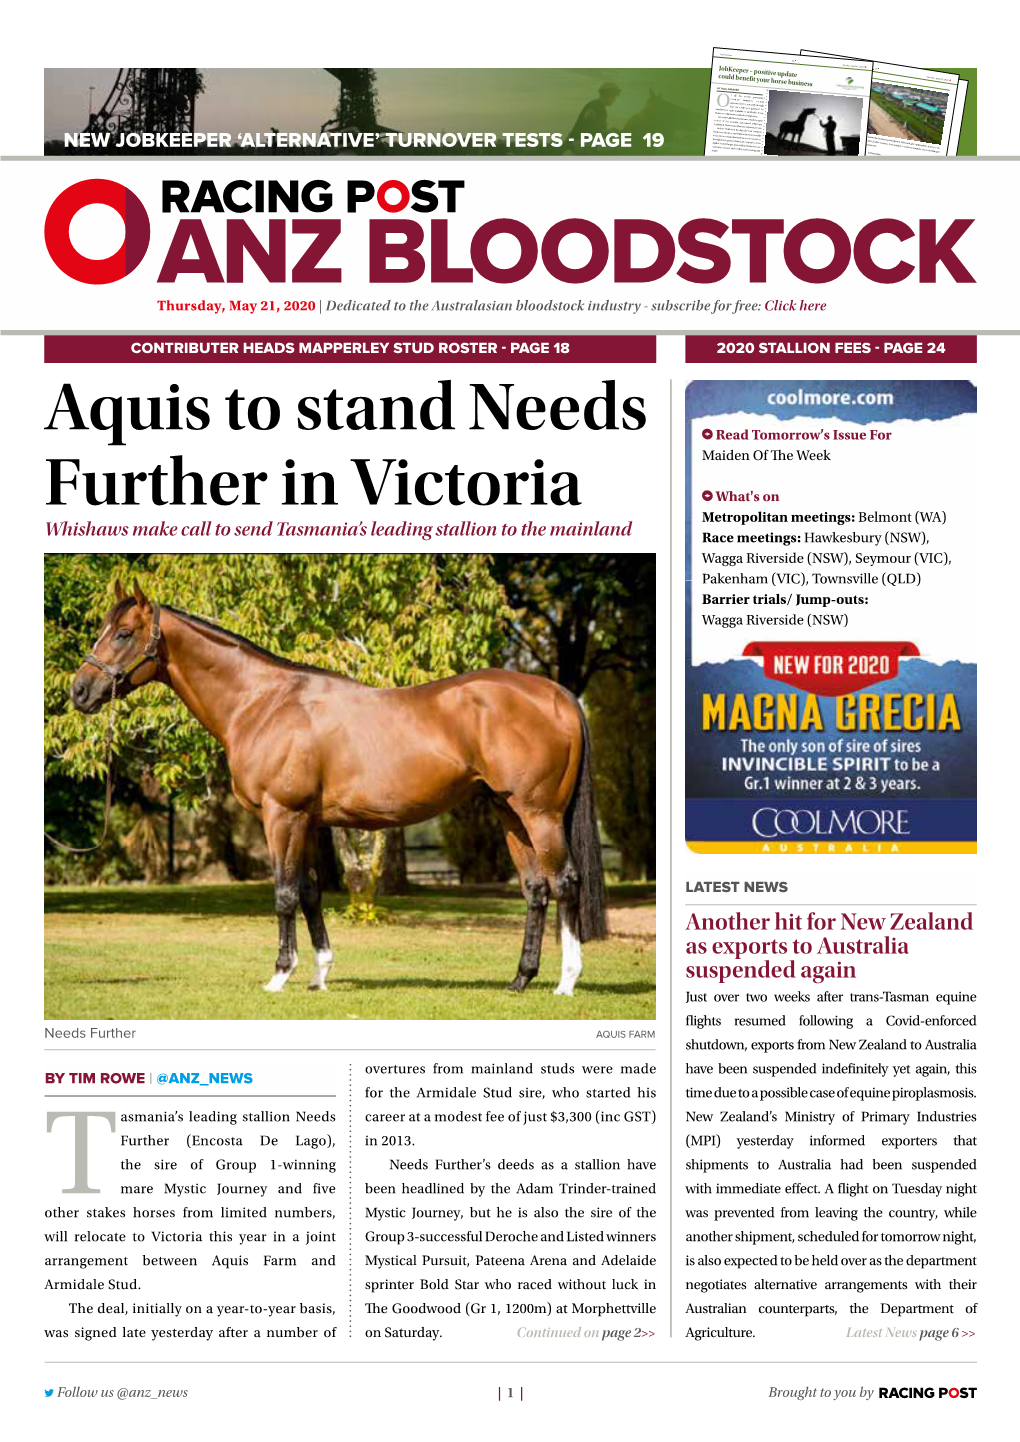 Aquis to Stand Needs Further in Victoria | 2 | Thursday, May 21, 2020